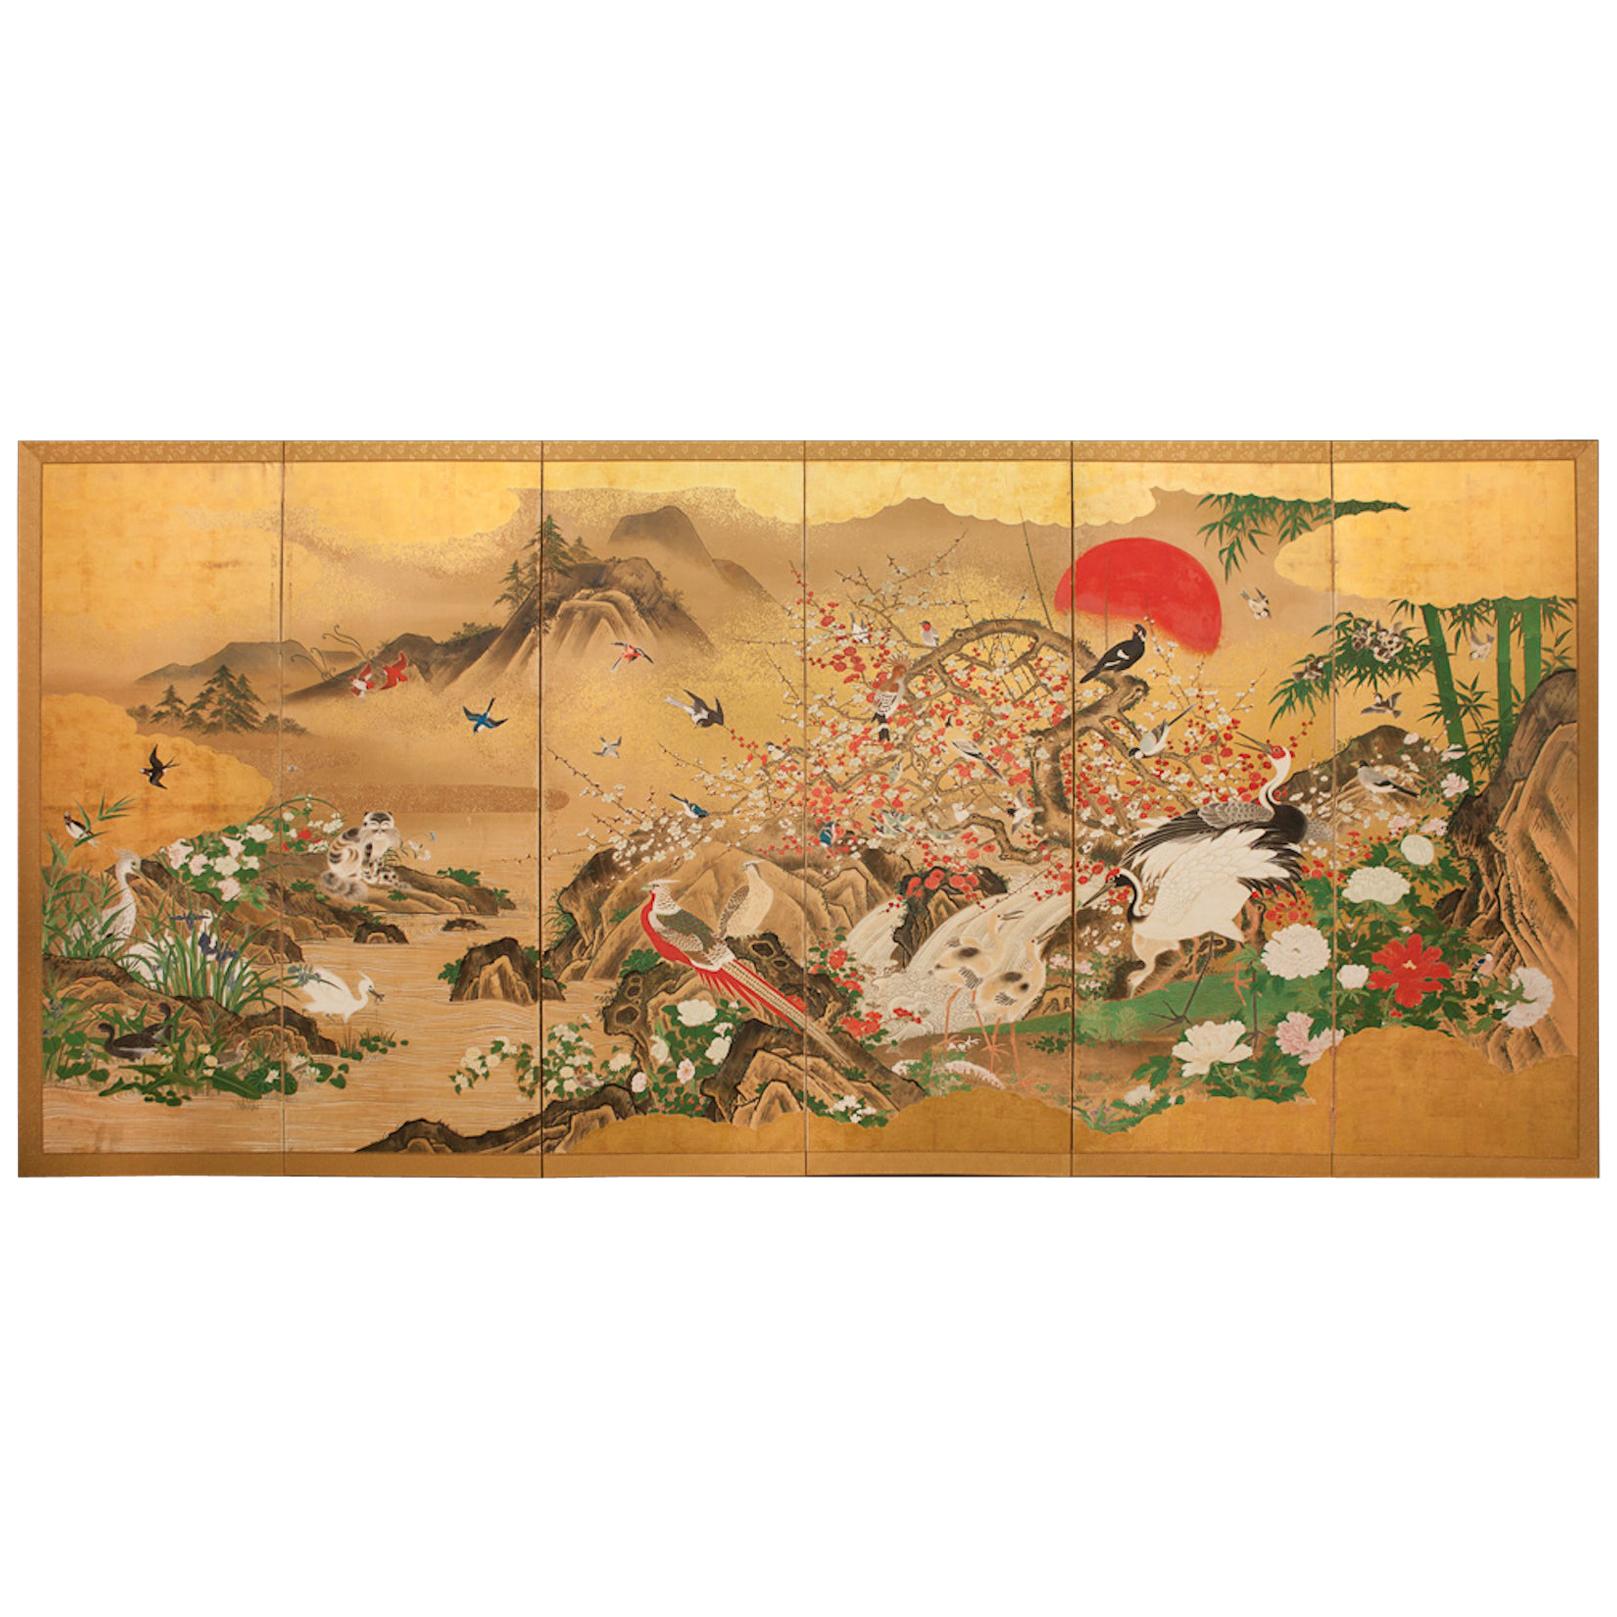 Japanese Screen: Animals and Flowers in a Landscape with Rising Sun